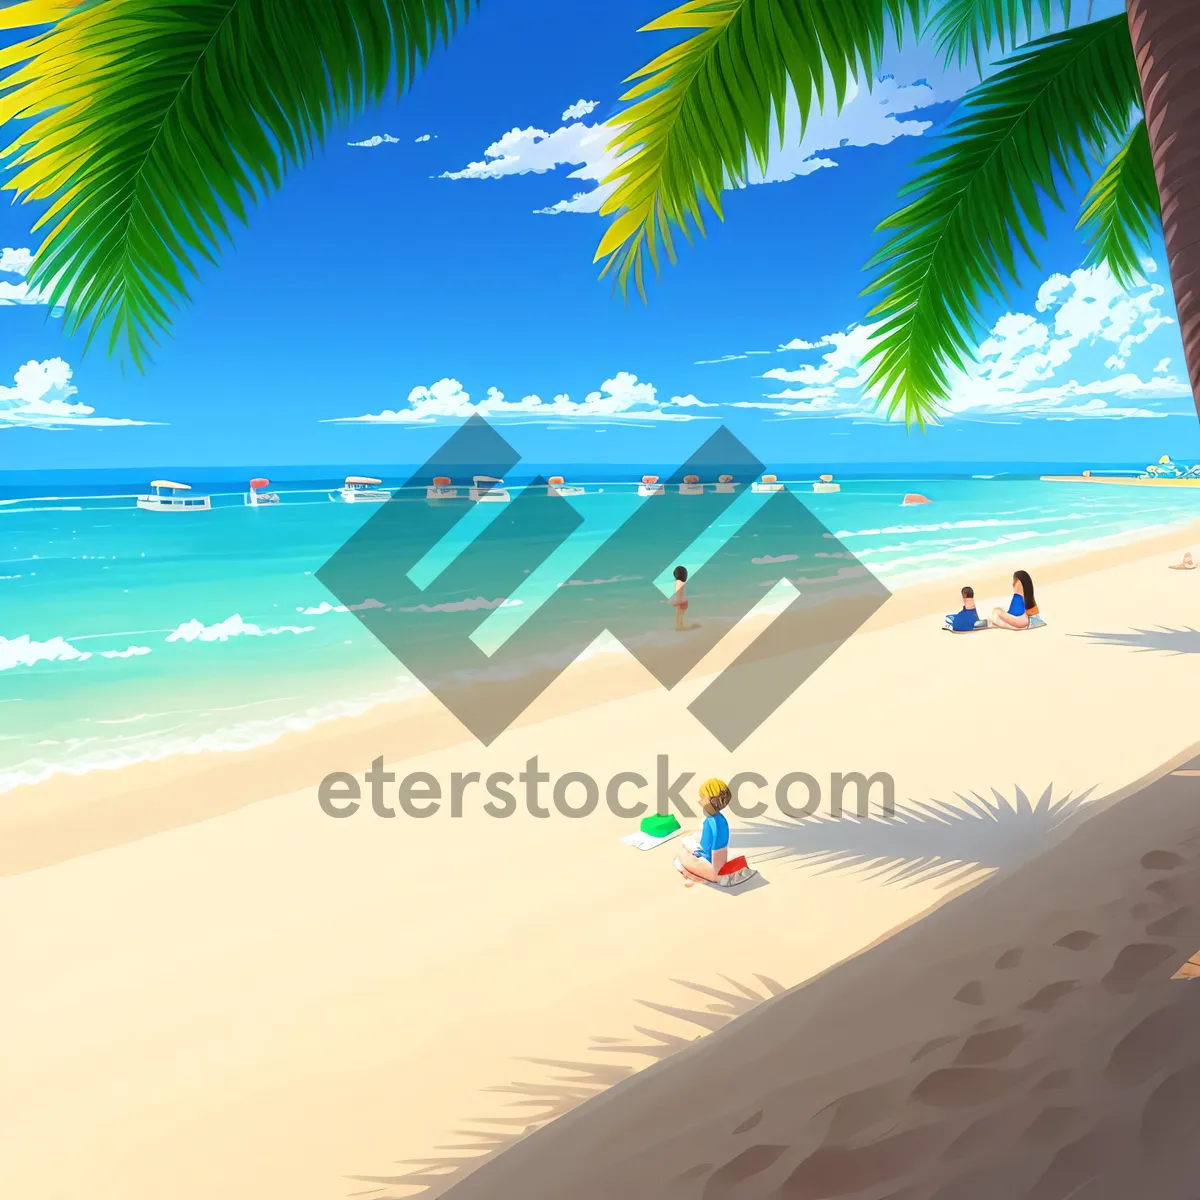 Picture of Turquoise paradise: Tranquil beach with palm trees